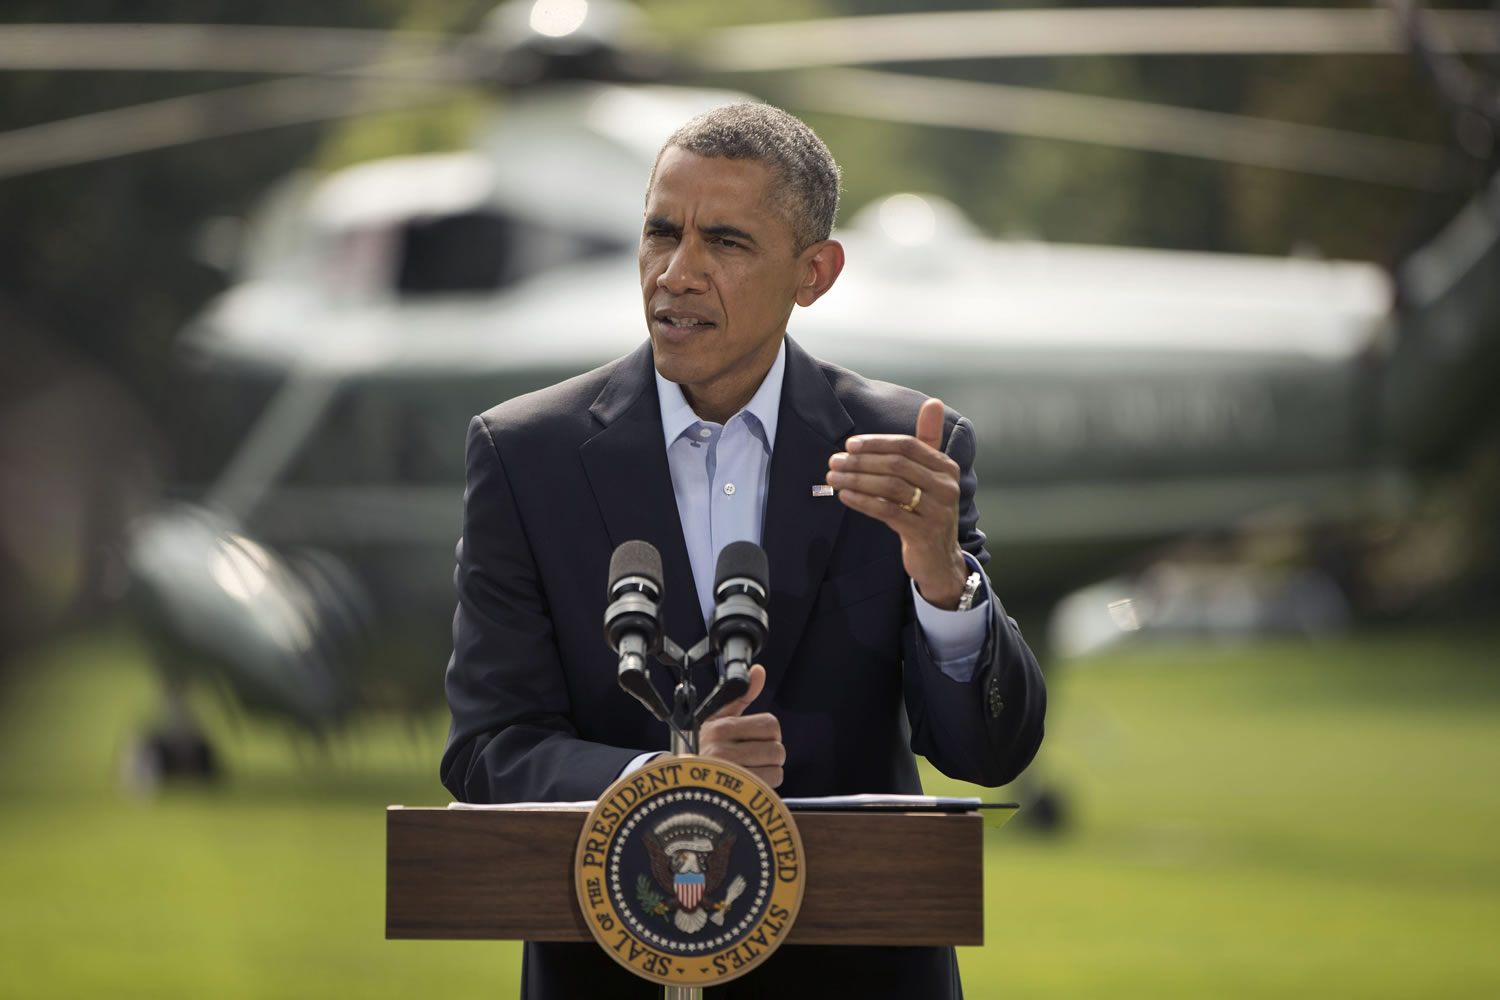 President Barack Obama speaks on the South Lawn of the White House in Washington on Saturday about ongoing situation in Iraq before his departure on Marine One for a vacation in Martha's Vineyard.